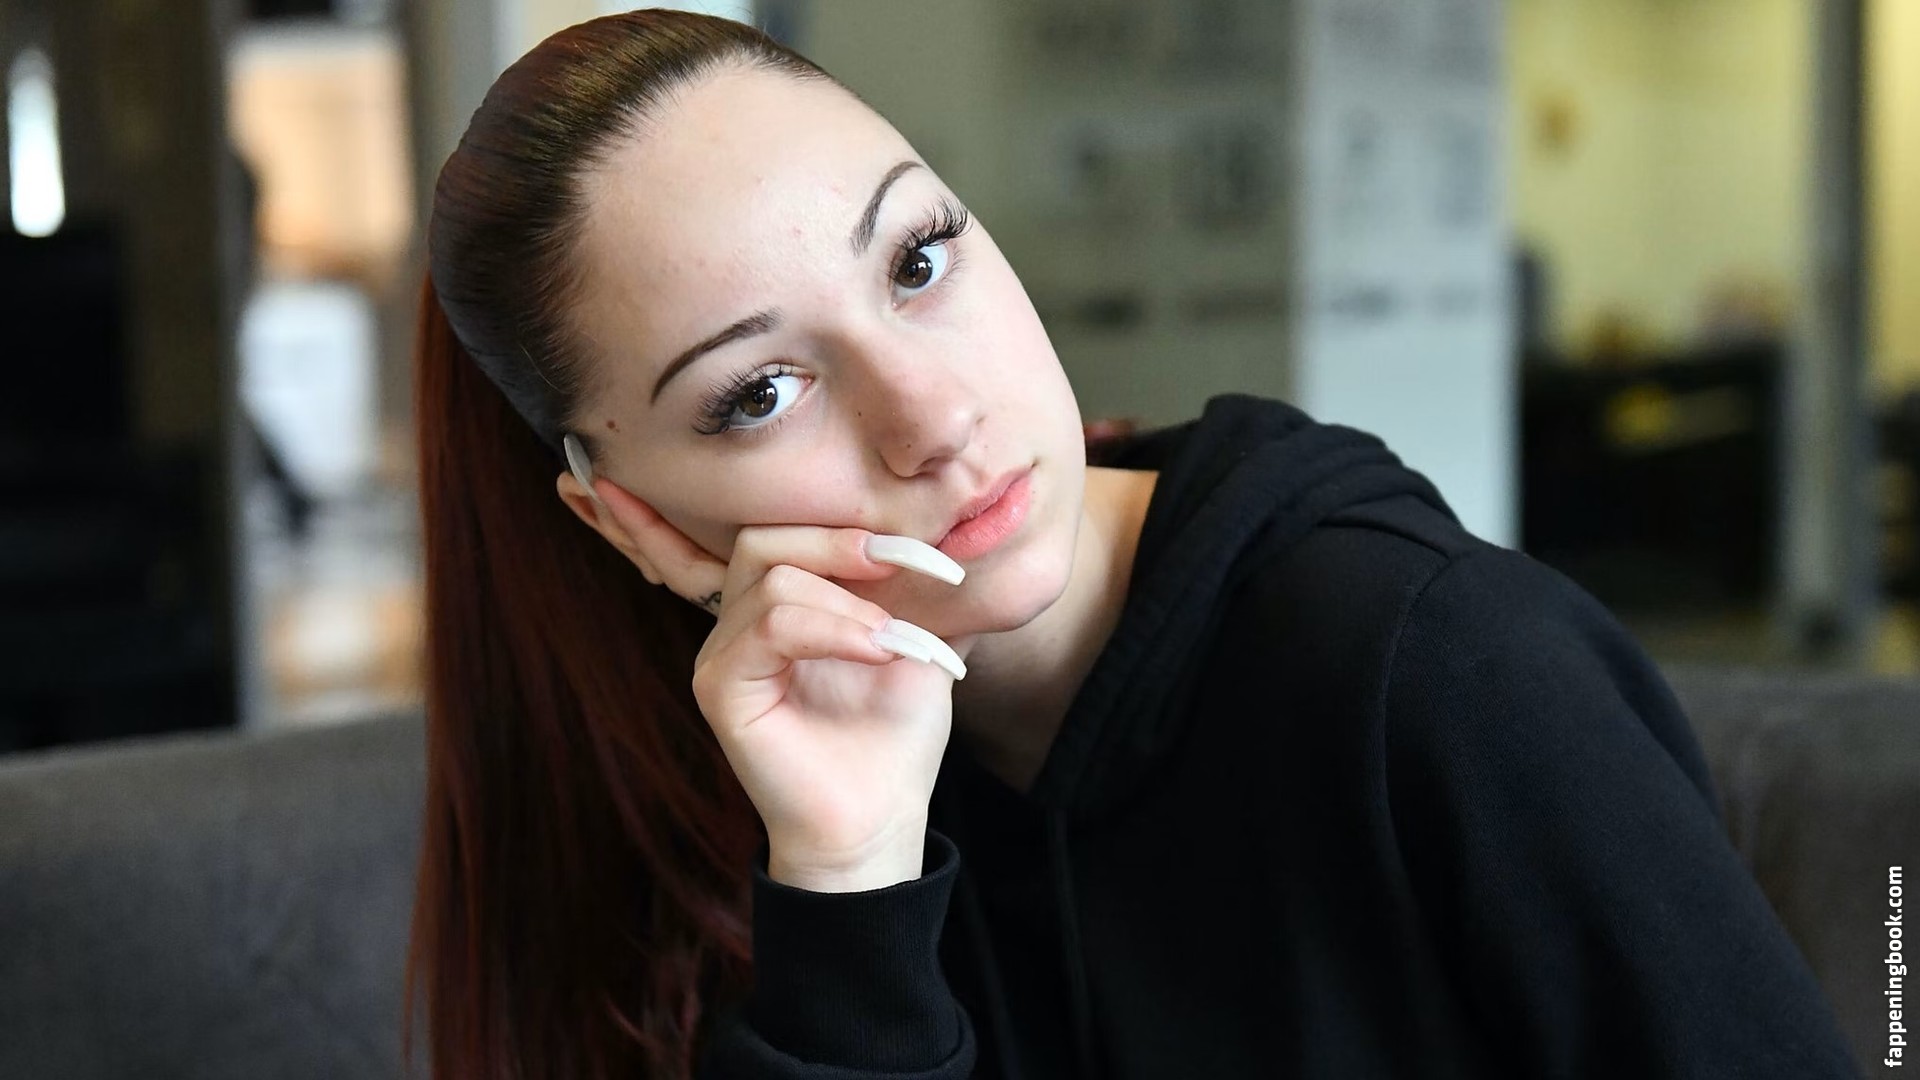 Bhad Bhabie / bhadbhabie Nude, OnlyFans Leaks, The Fappening Photo